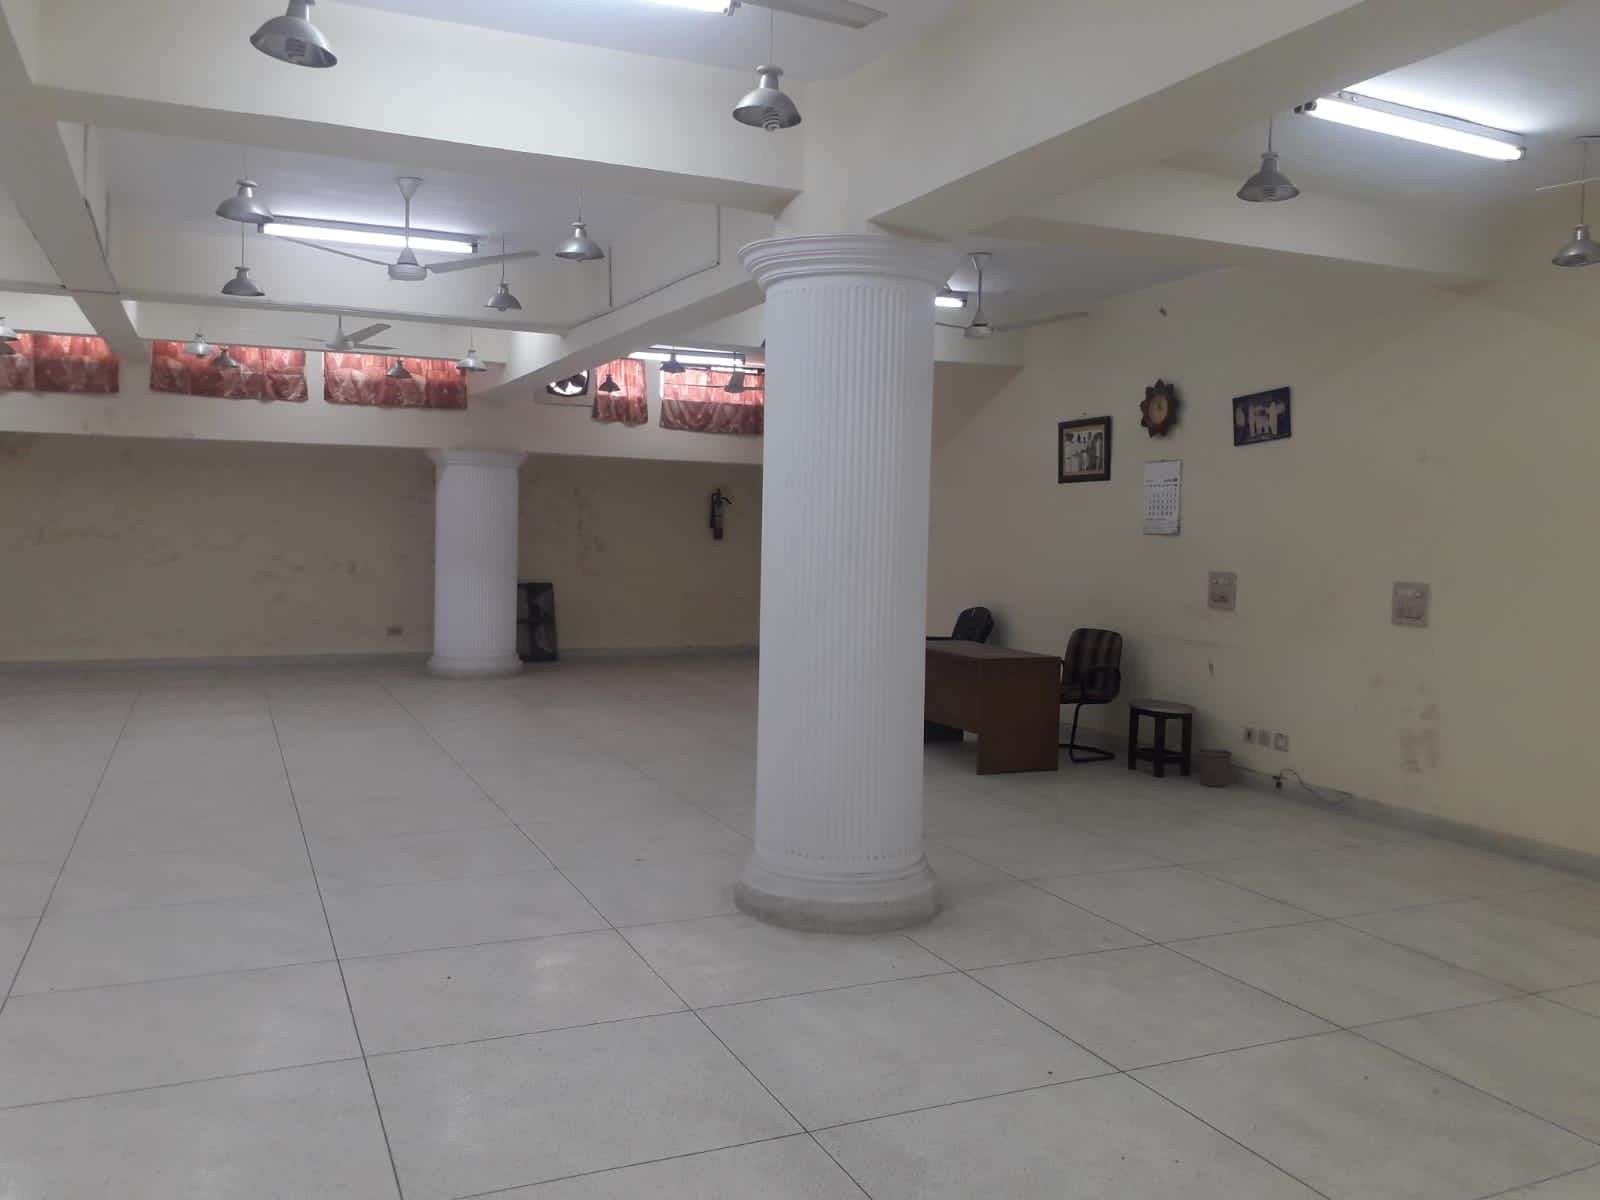 Commercial Office Space 3600 Sq.Ft. For Rent In Anup Nagar Delhi 6312596